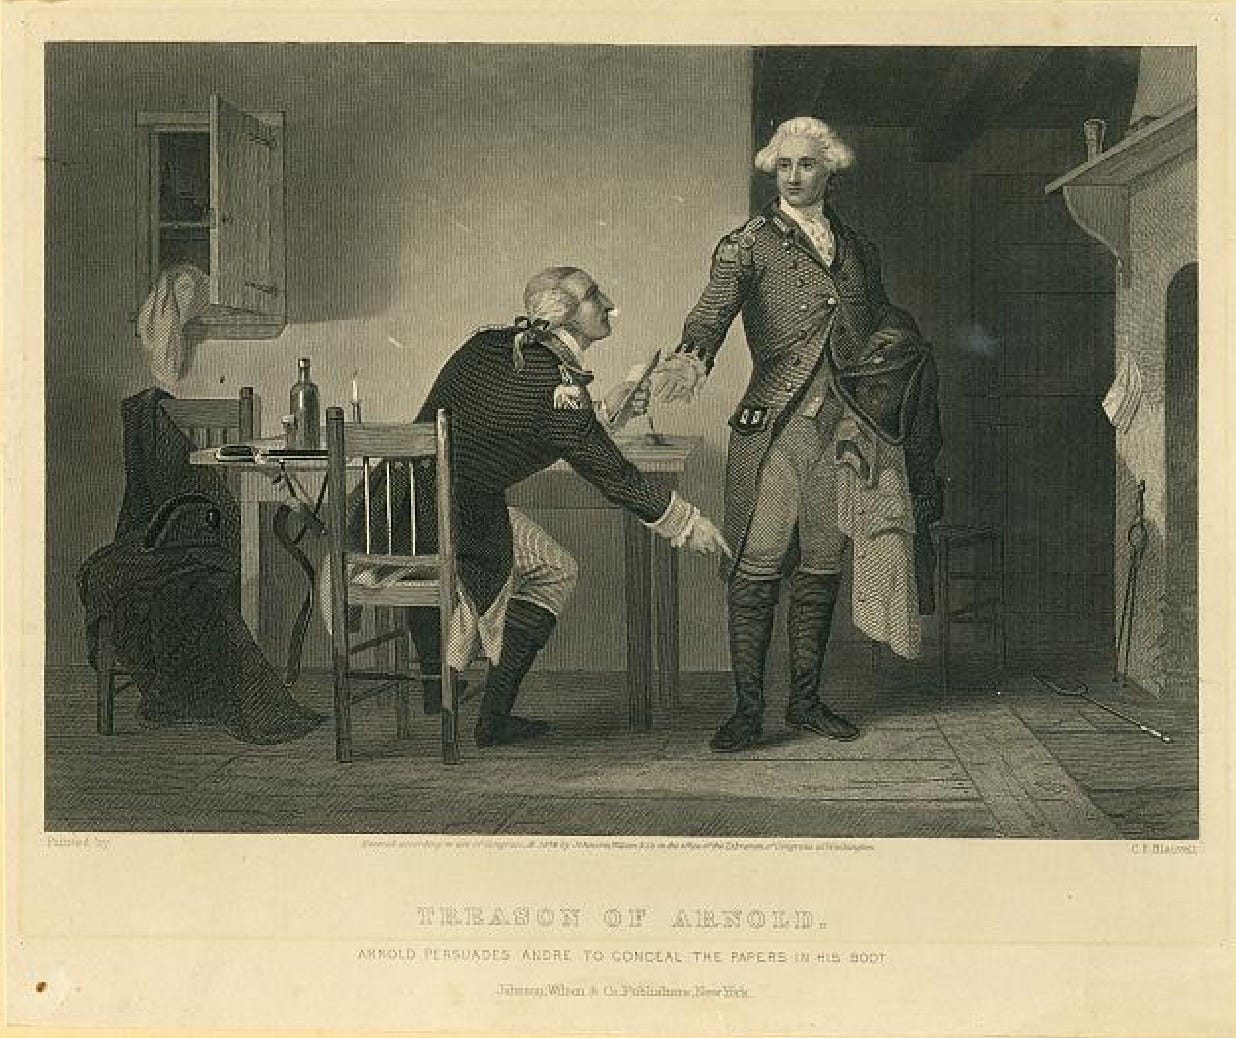 "Treason of Arnold: Arnold persuades Andre to conceal the papers in his boot," by C.F. Blauvelt.